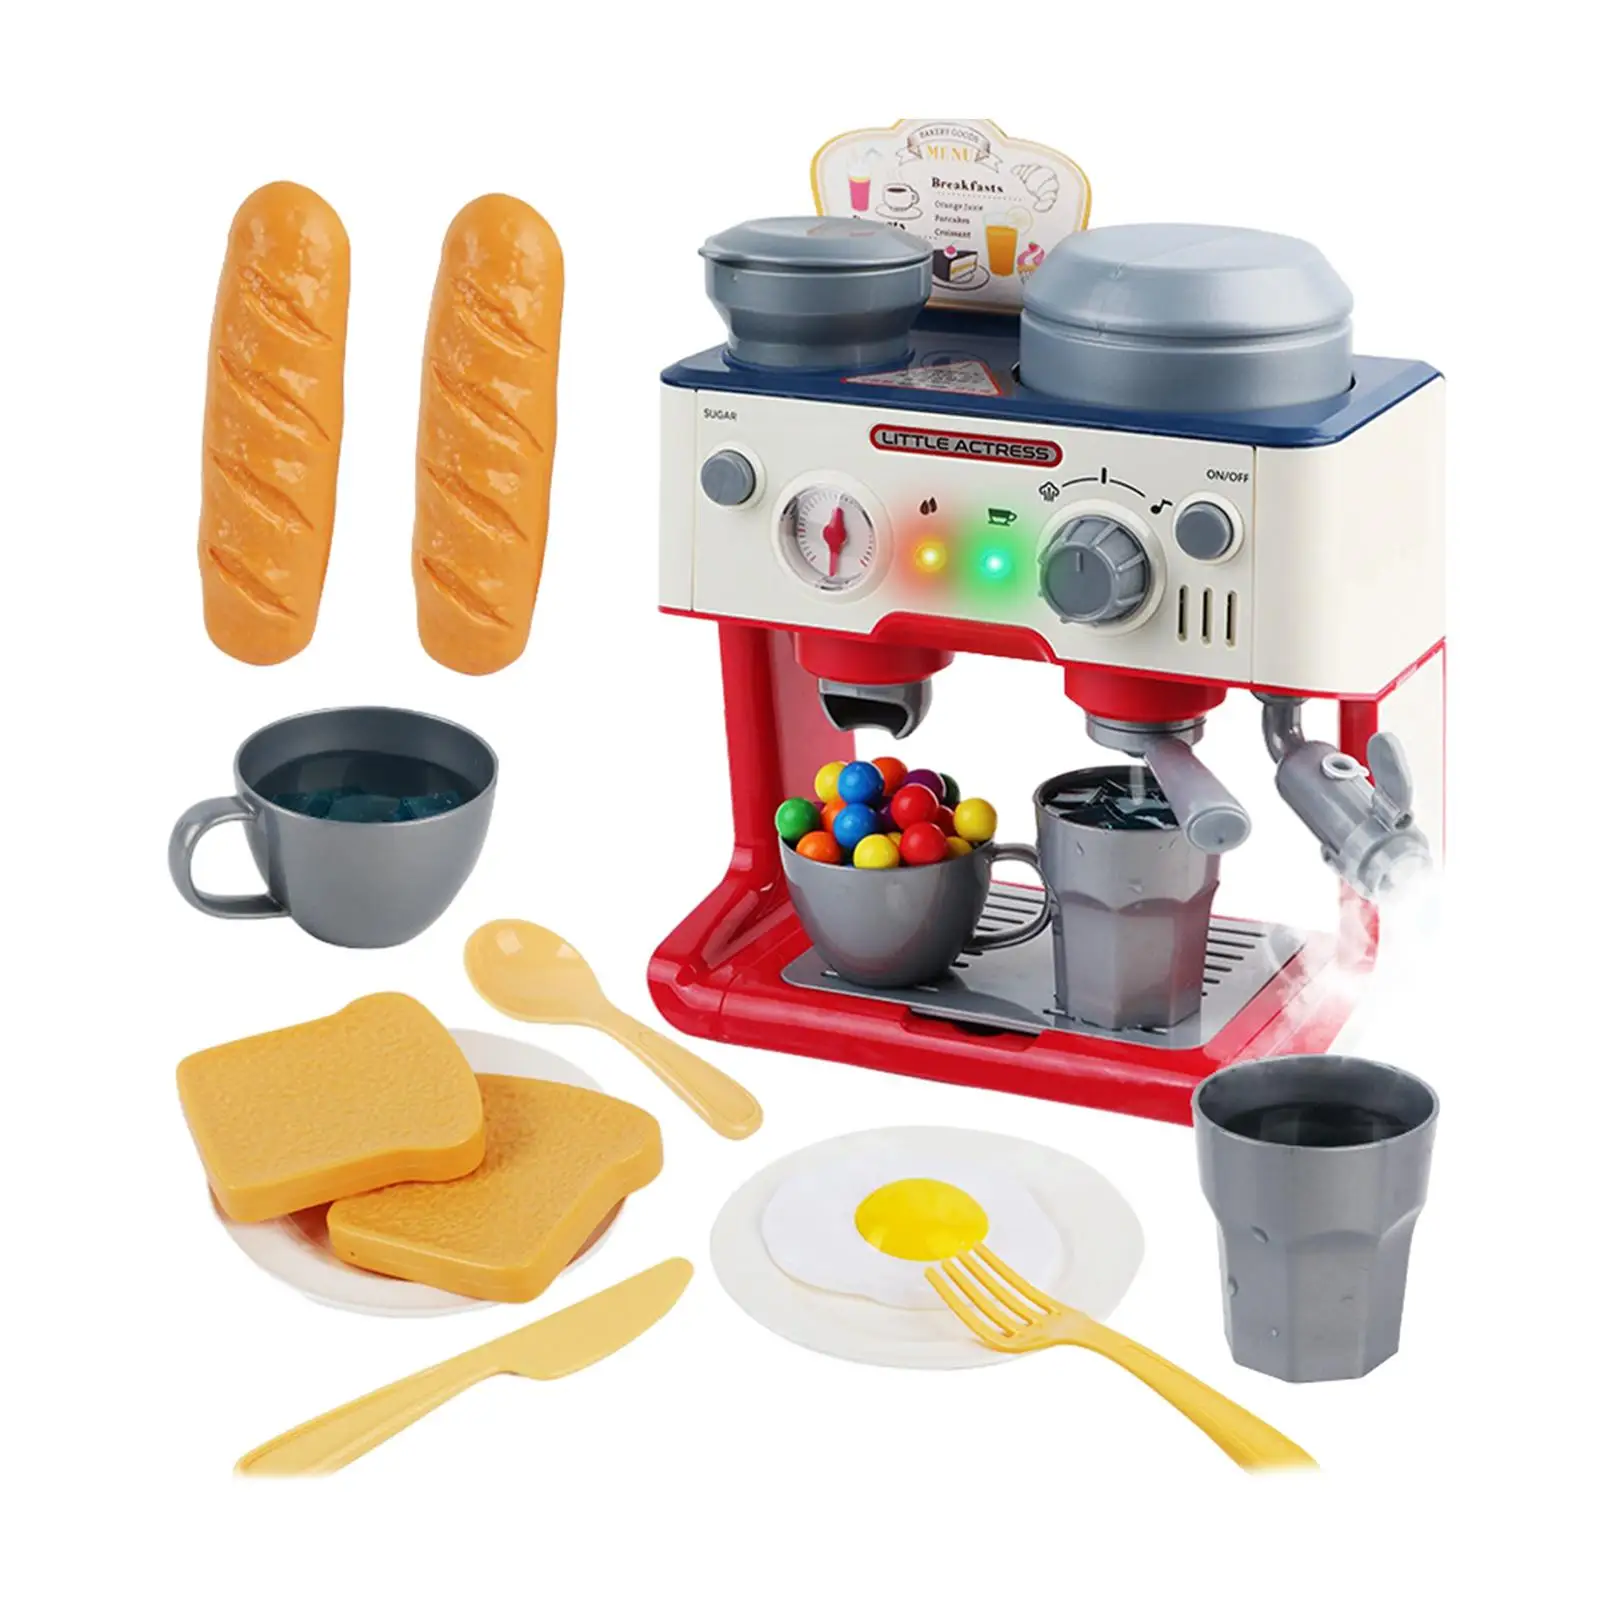 Simulation Coffee Maker Toys Develops Life Skills with Music Upgraded Toy Coffee Set for Kids Boys Children Girls Birthday Gifts